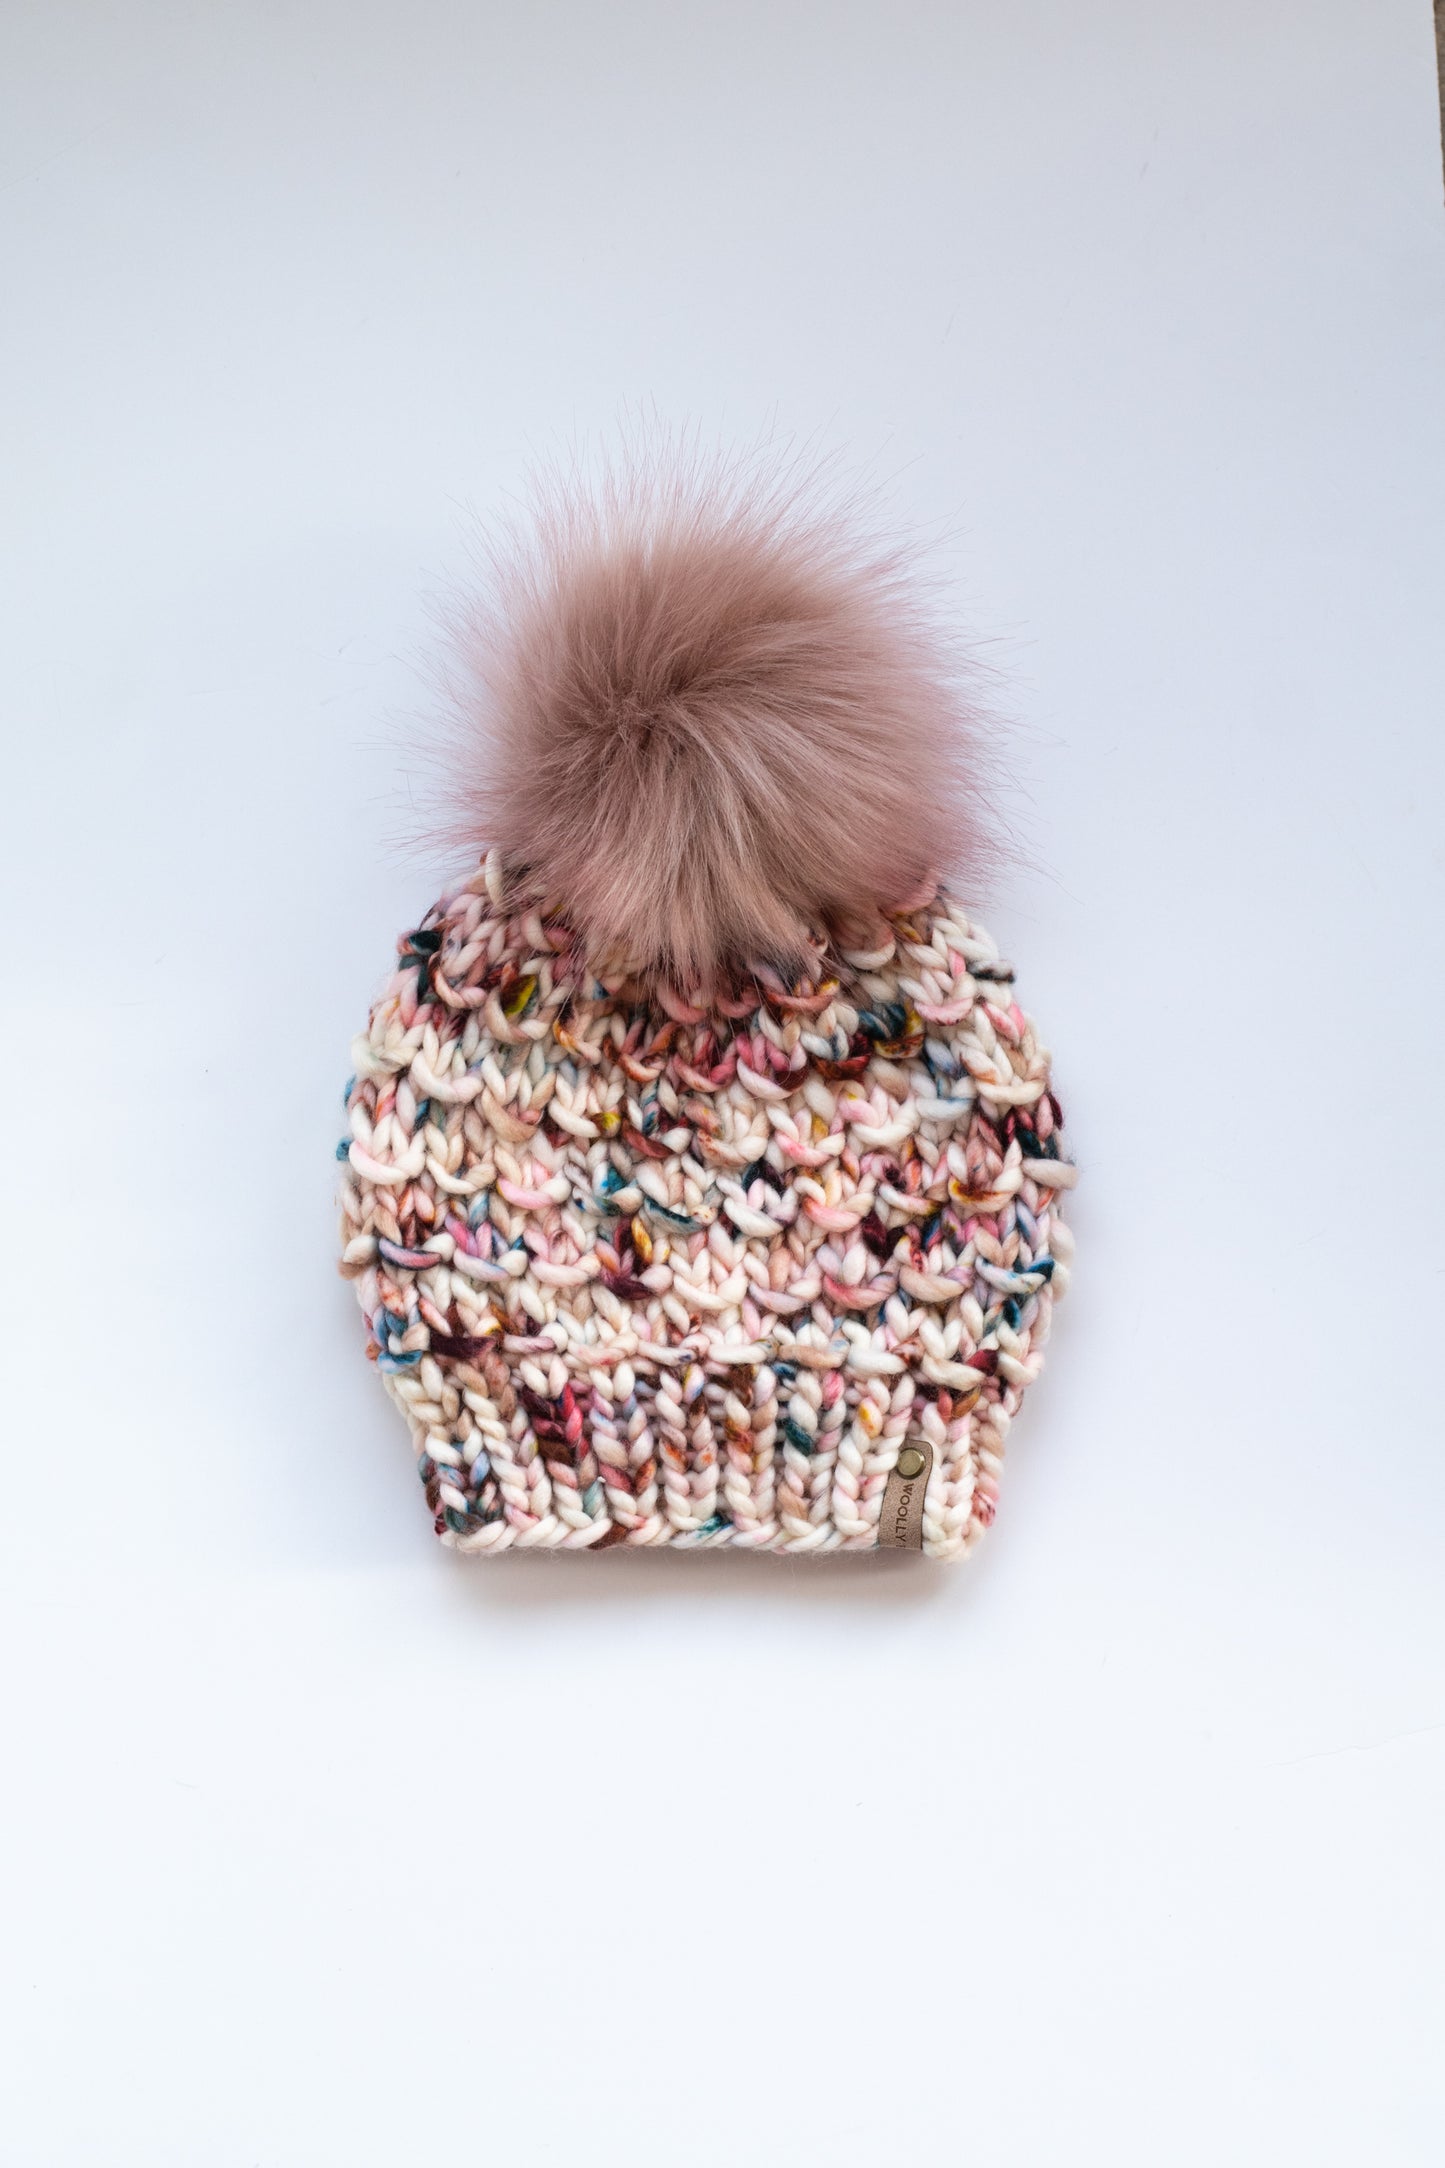 Cream and Pink Merino Wool Knit Hat with Faux Fur Pom Pom - Hand-Dyed Yarn